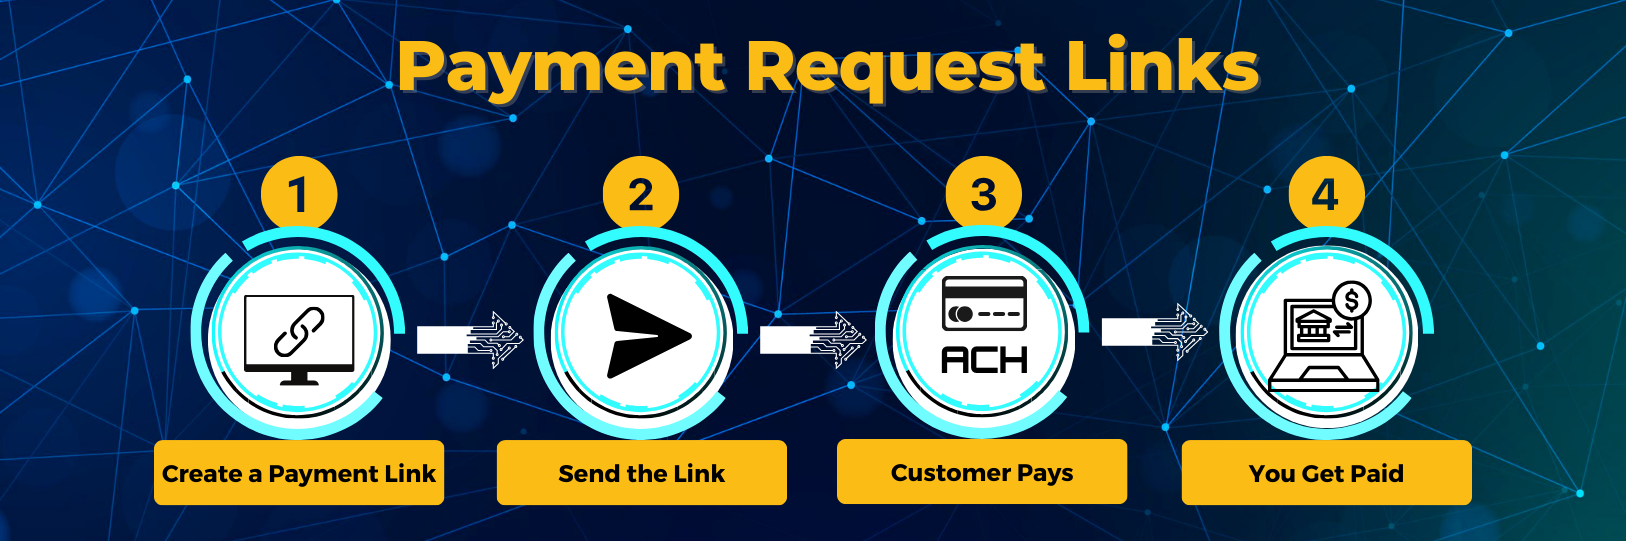 Simplify Your Payment Process with UTA's Payment Request Links